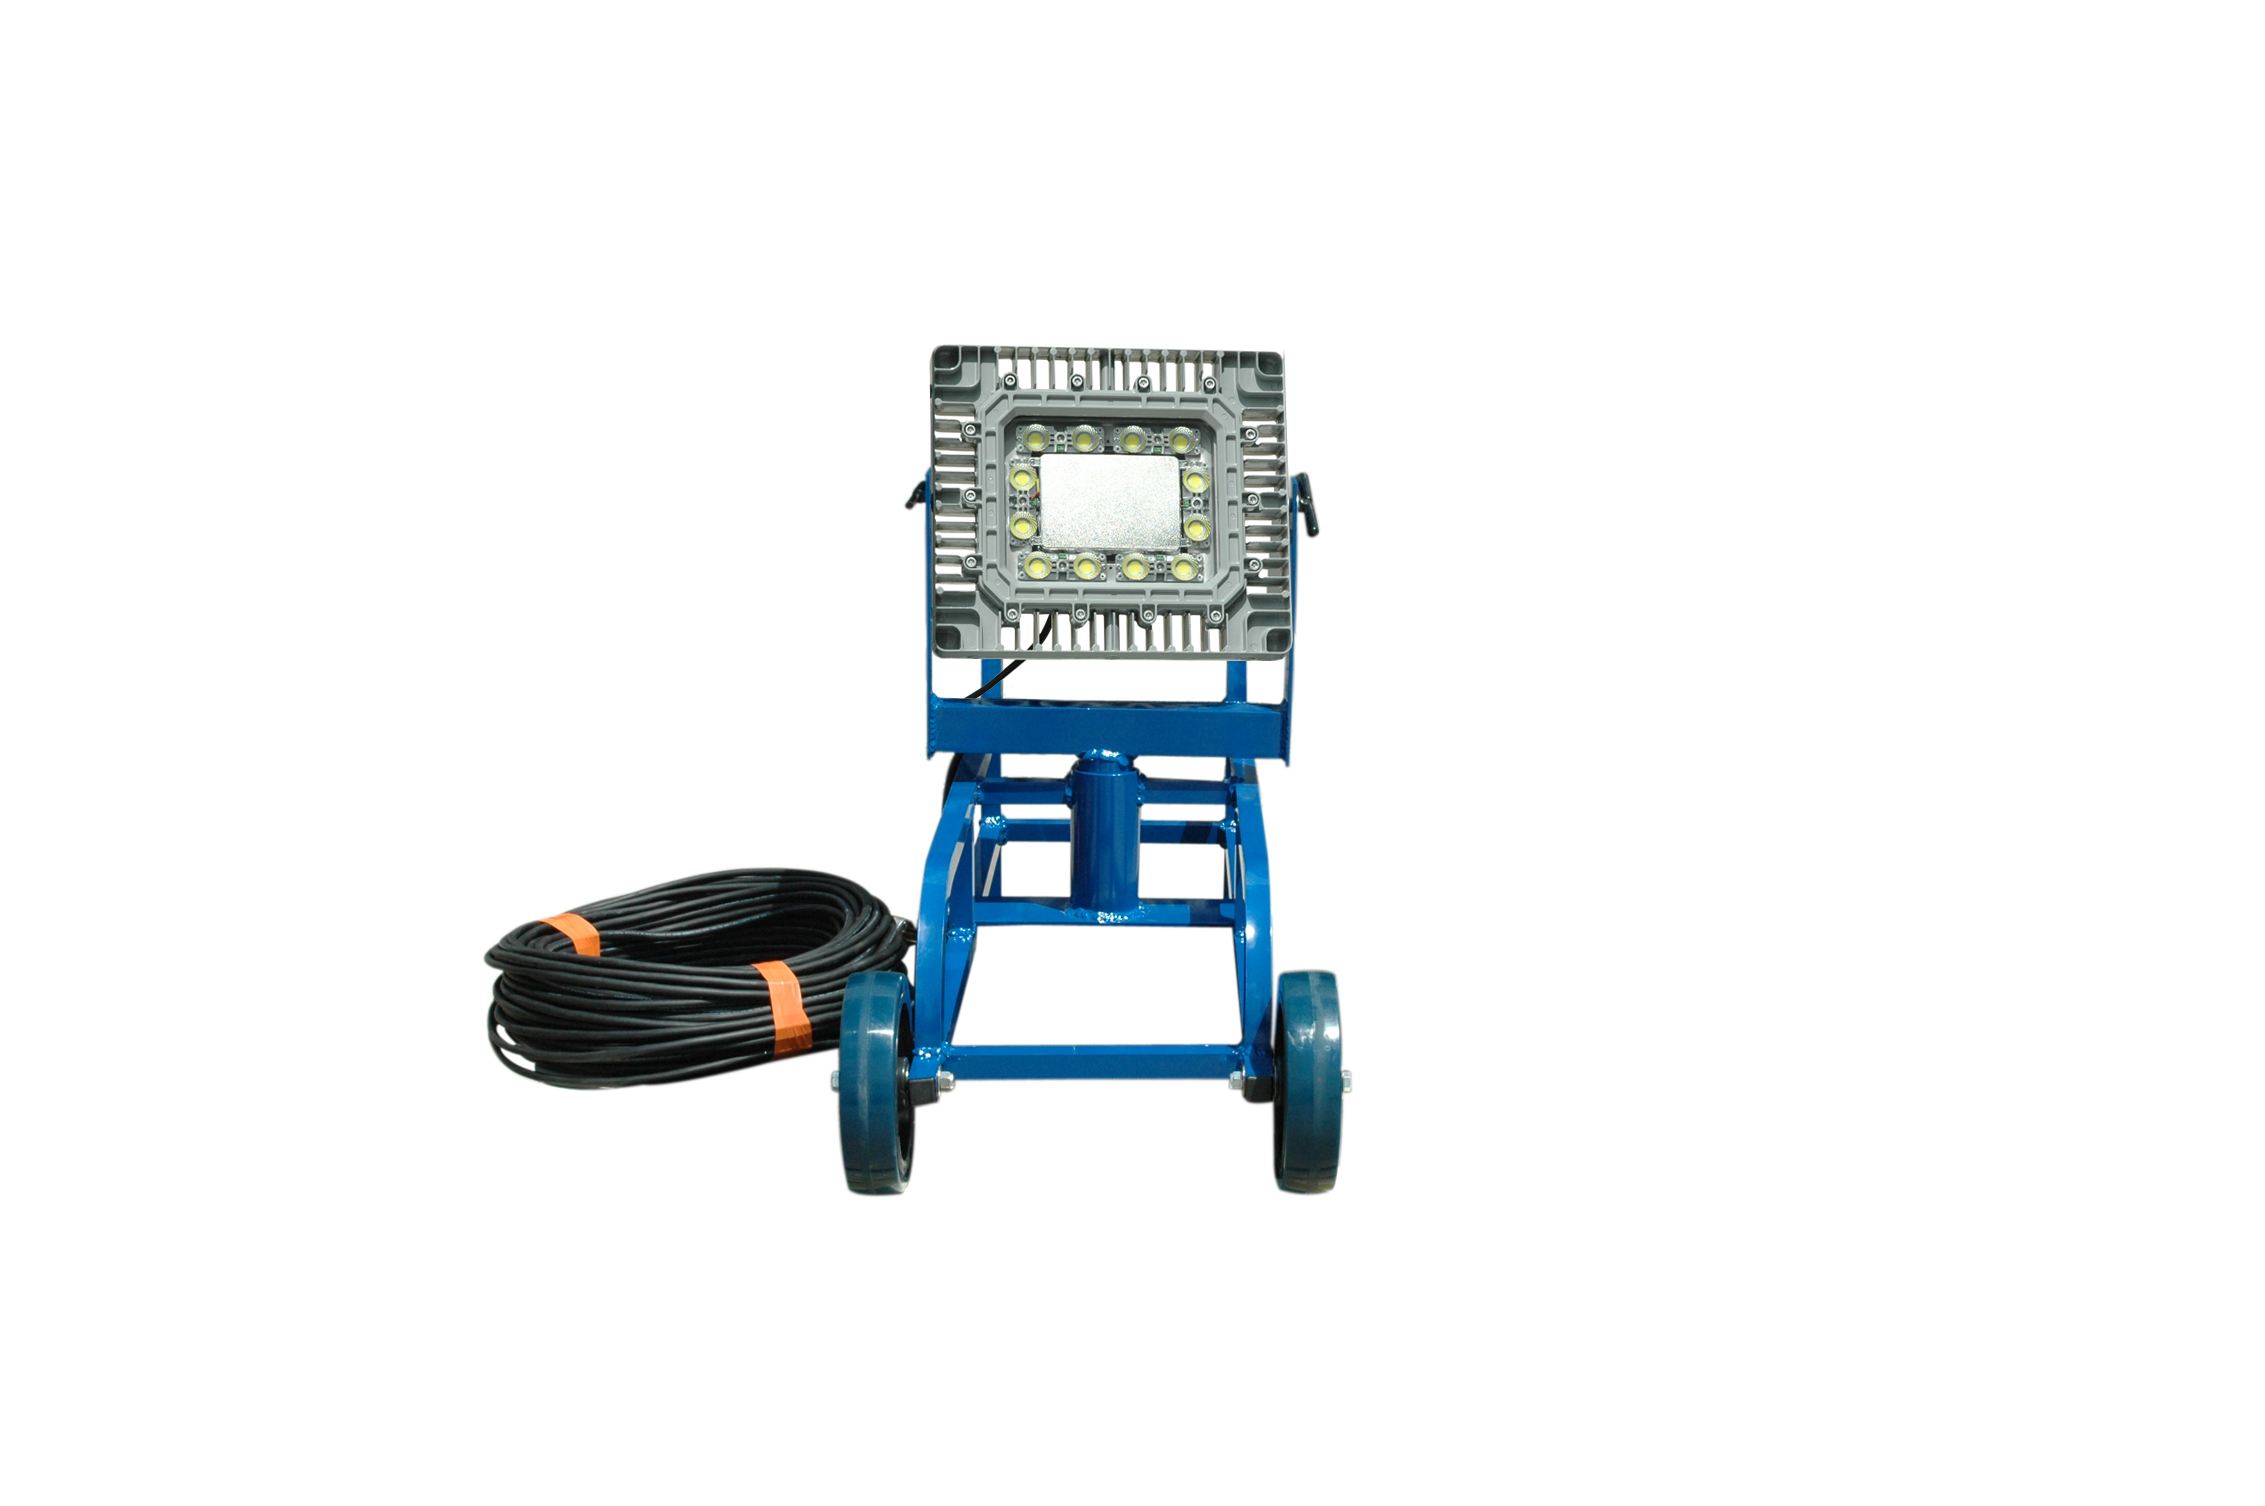 Portable Class 2 Division 1 LED Light Cart for Tank Cleaning Applications